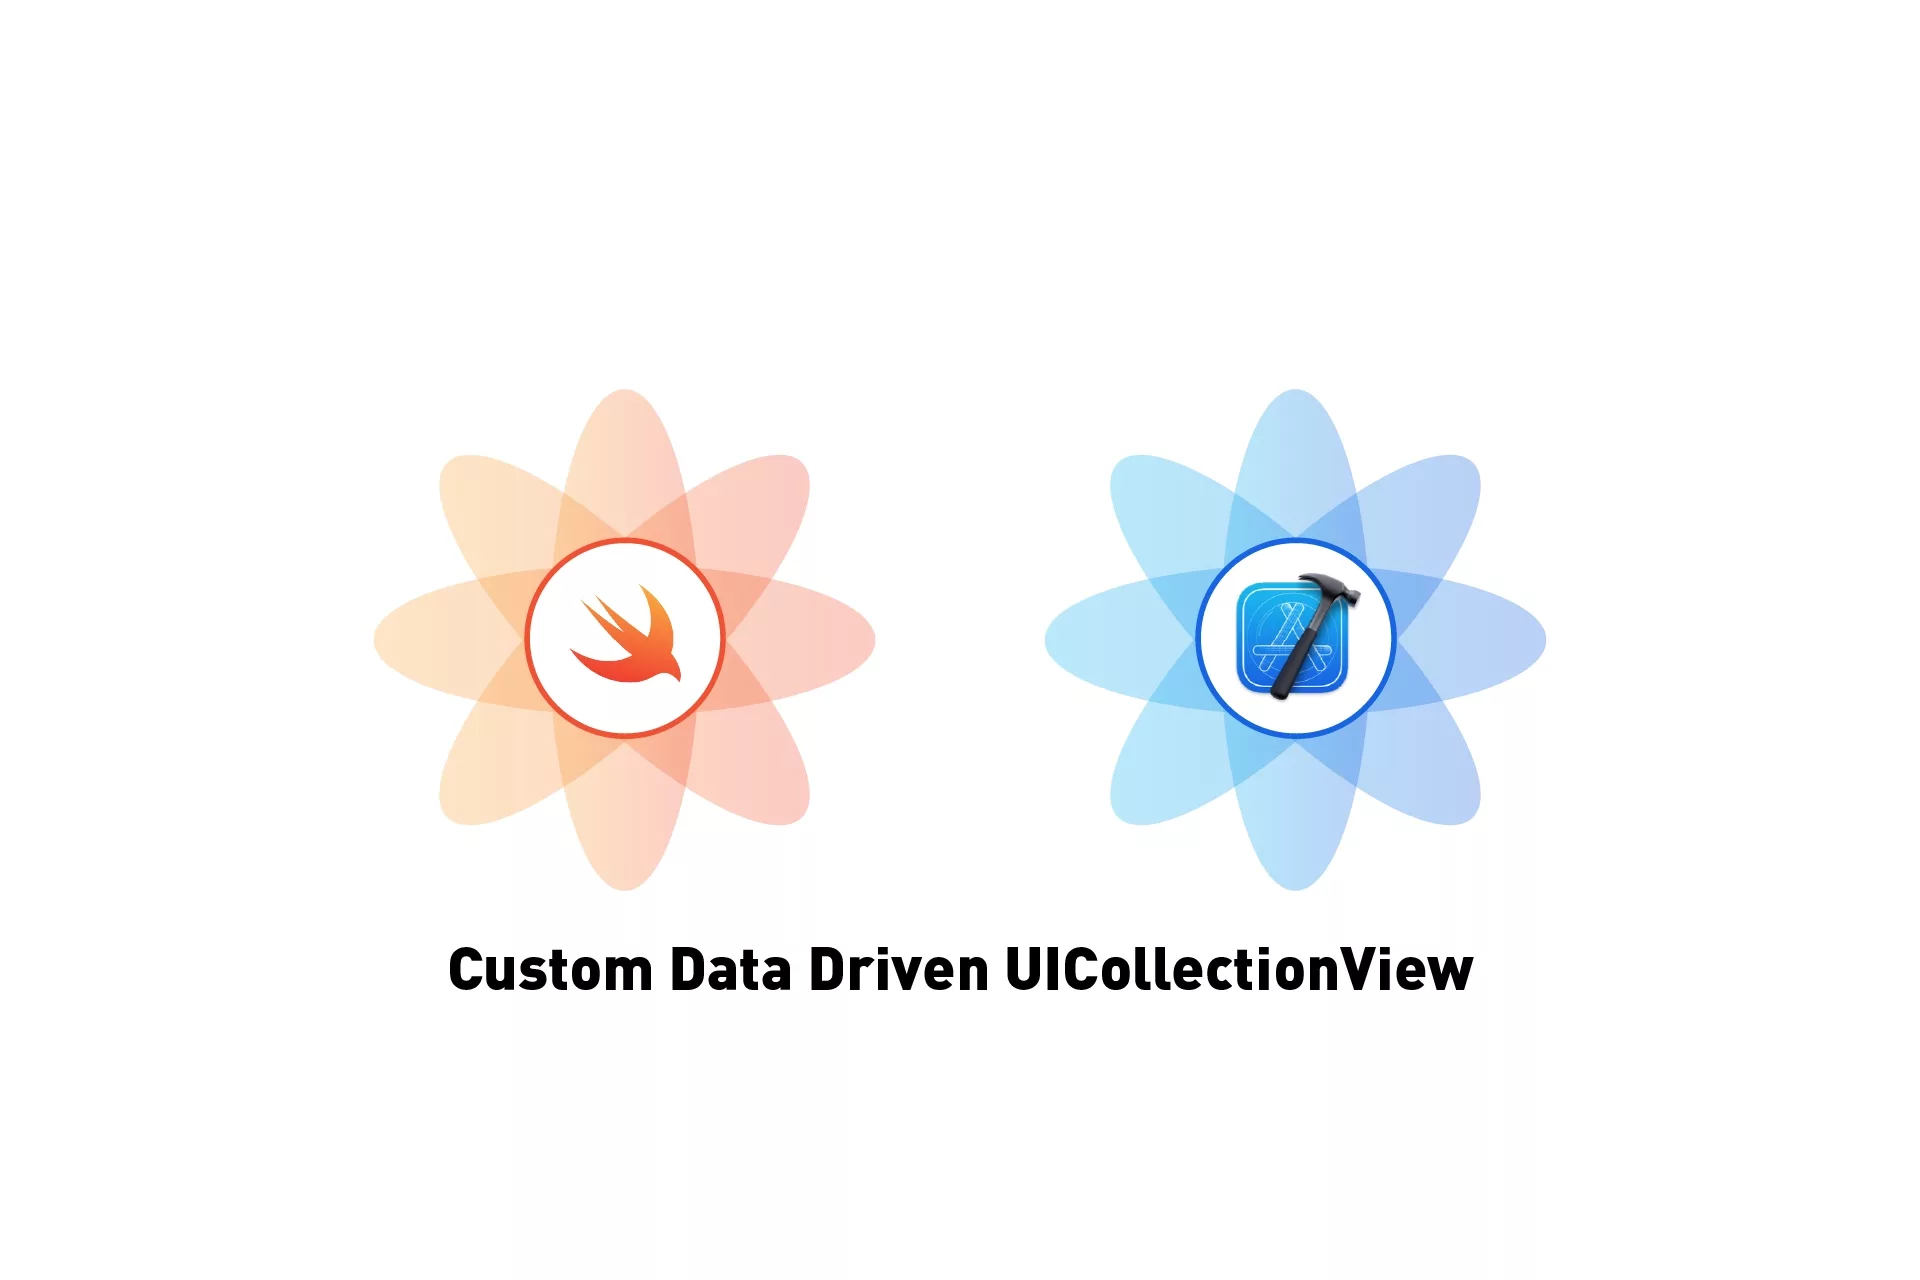 A flower that represents Swift next to a flower that represents XCode. Beneath it sits the text that states 'Custom Data Driven UICollectionView'.